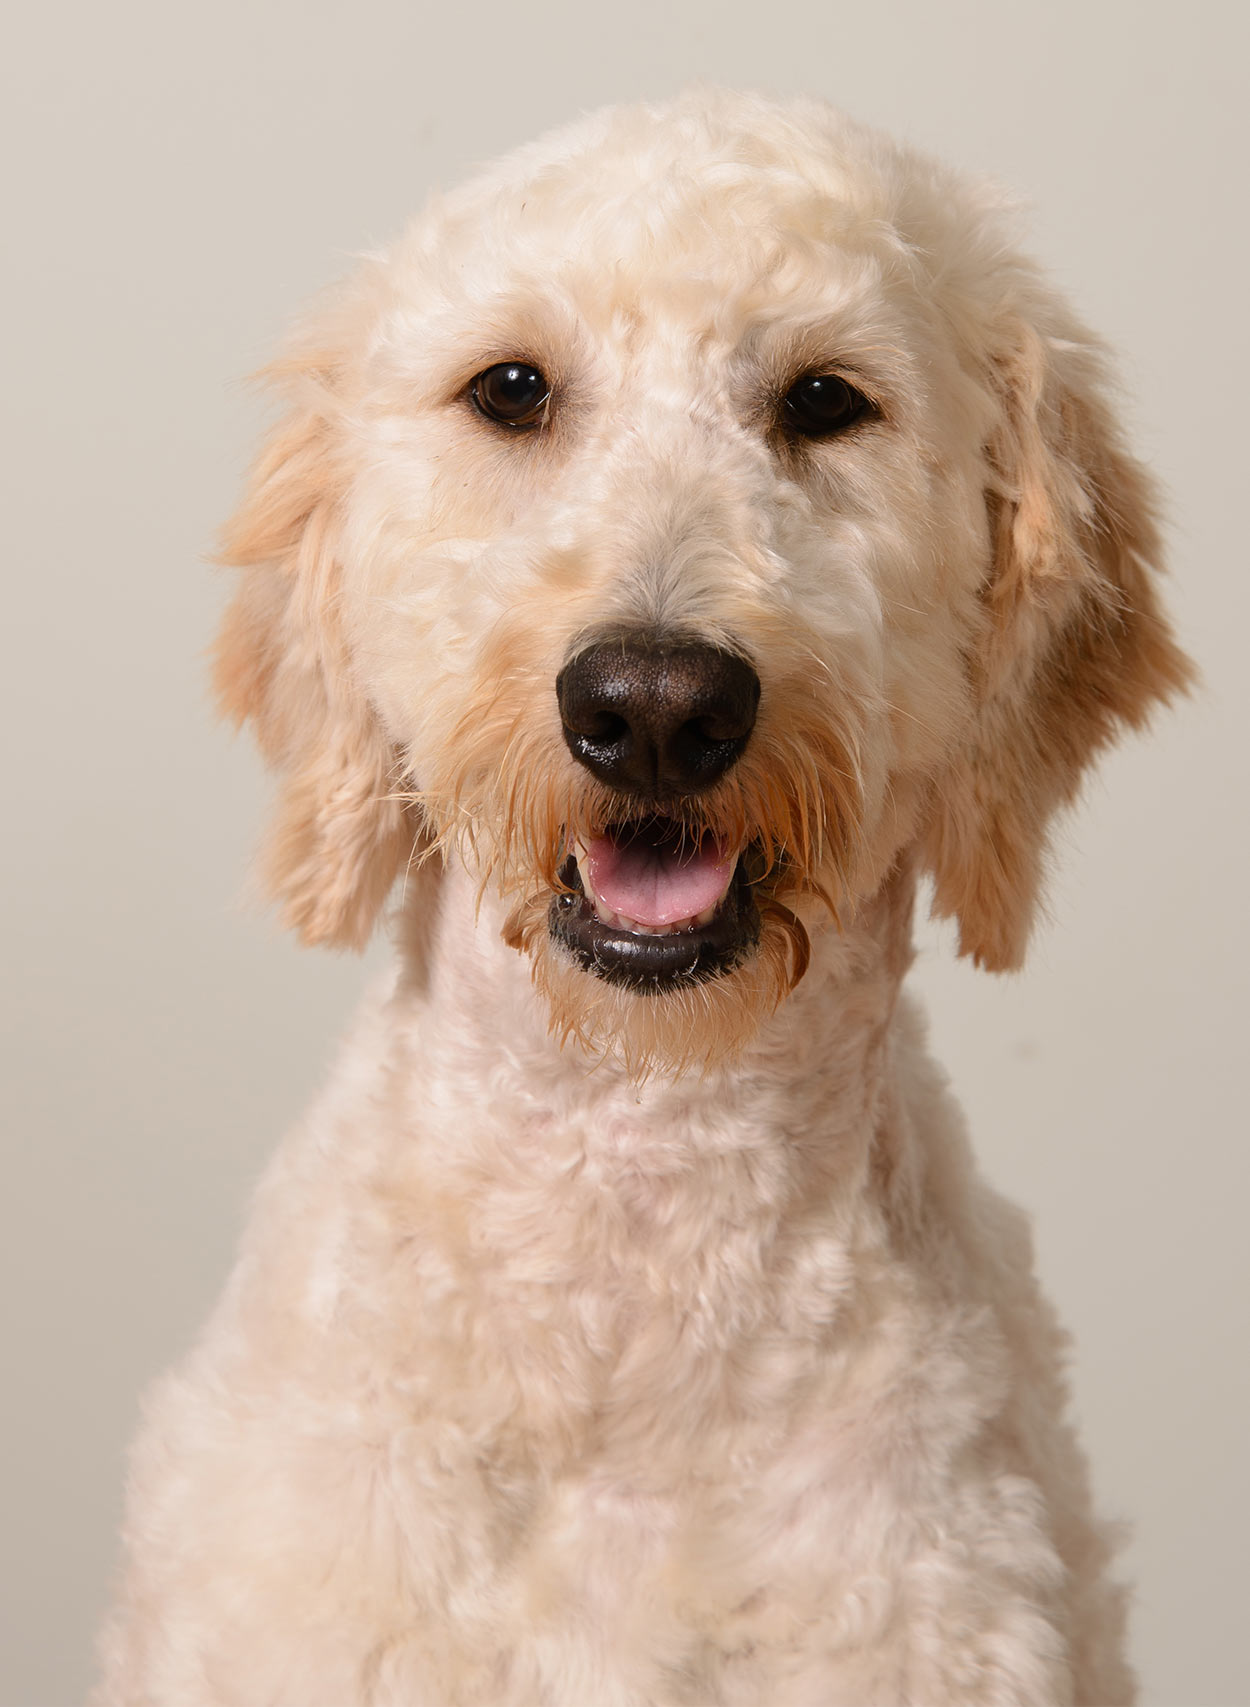 Best Food For Goldendoodle Puppies, Dogs and Seniors